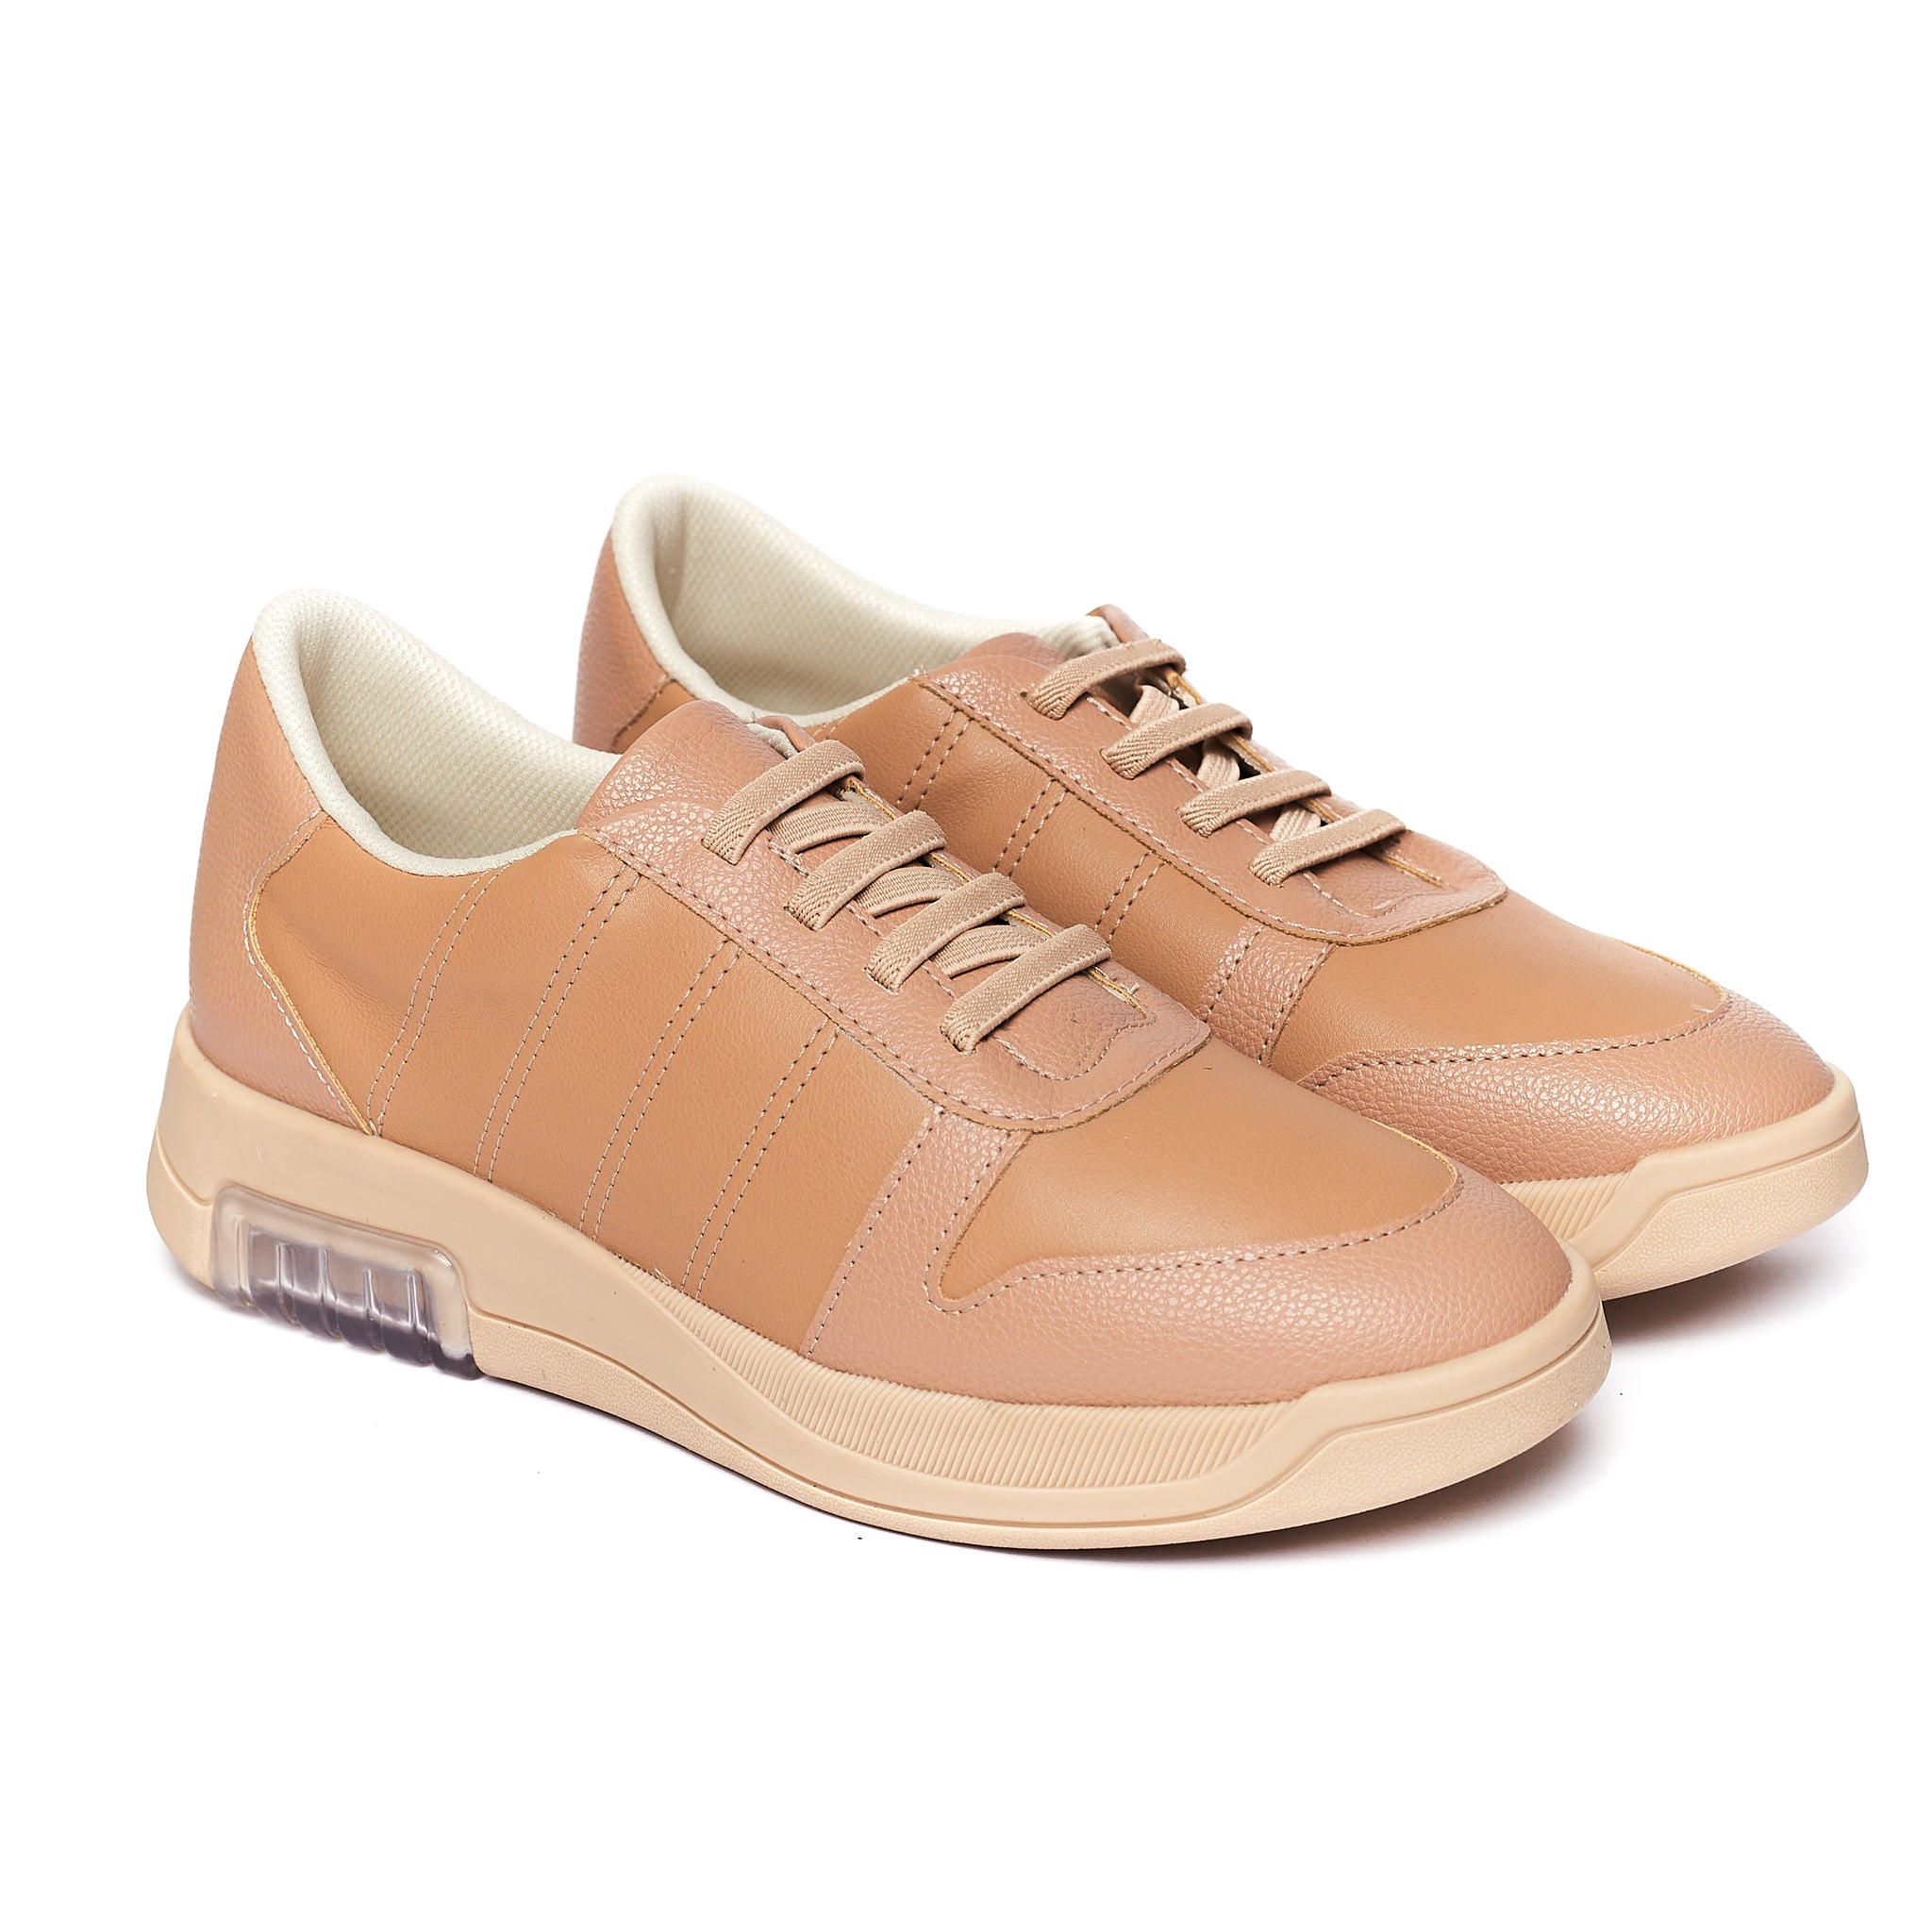 Markér indre med tiden Nude Sneakers for Women (953.002) – Simply Shoes Hong Kong